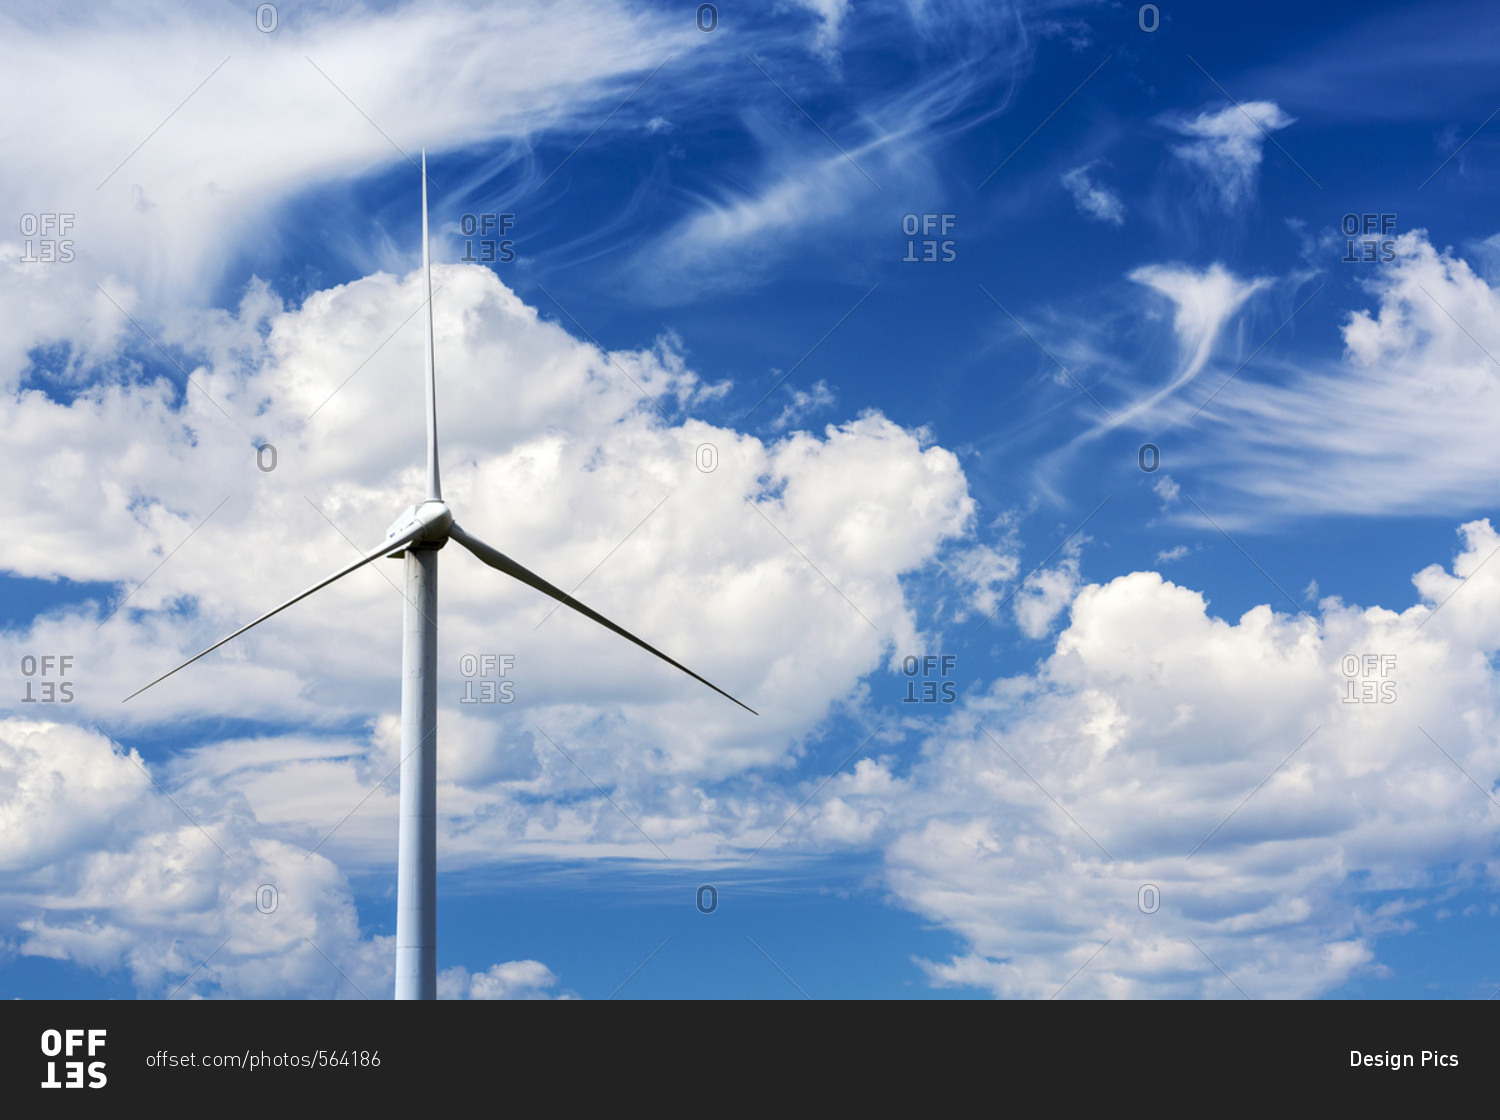 Close up of a large wind mill's blades with clouds and blue sky, North of Glenwood, Alberta, Canada